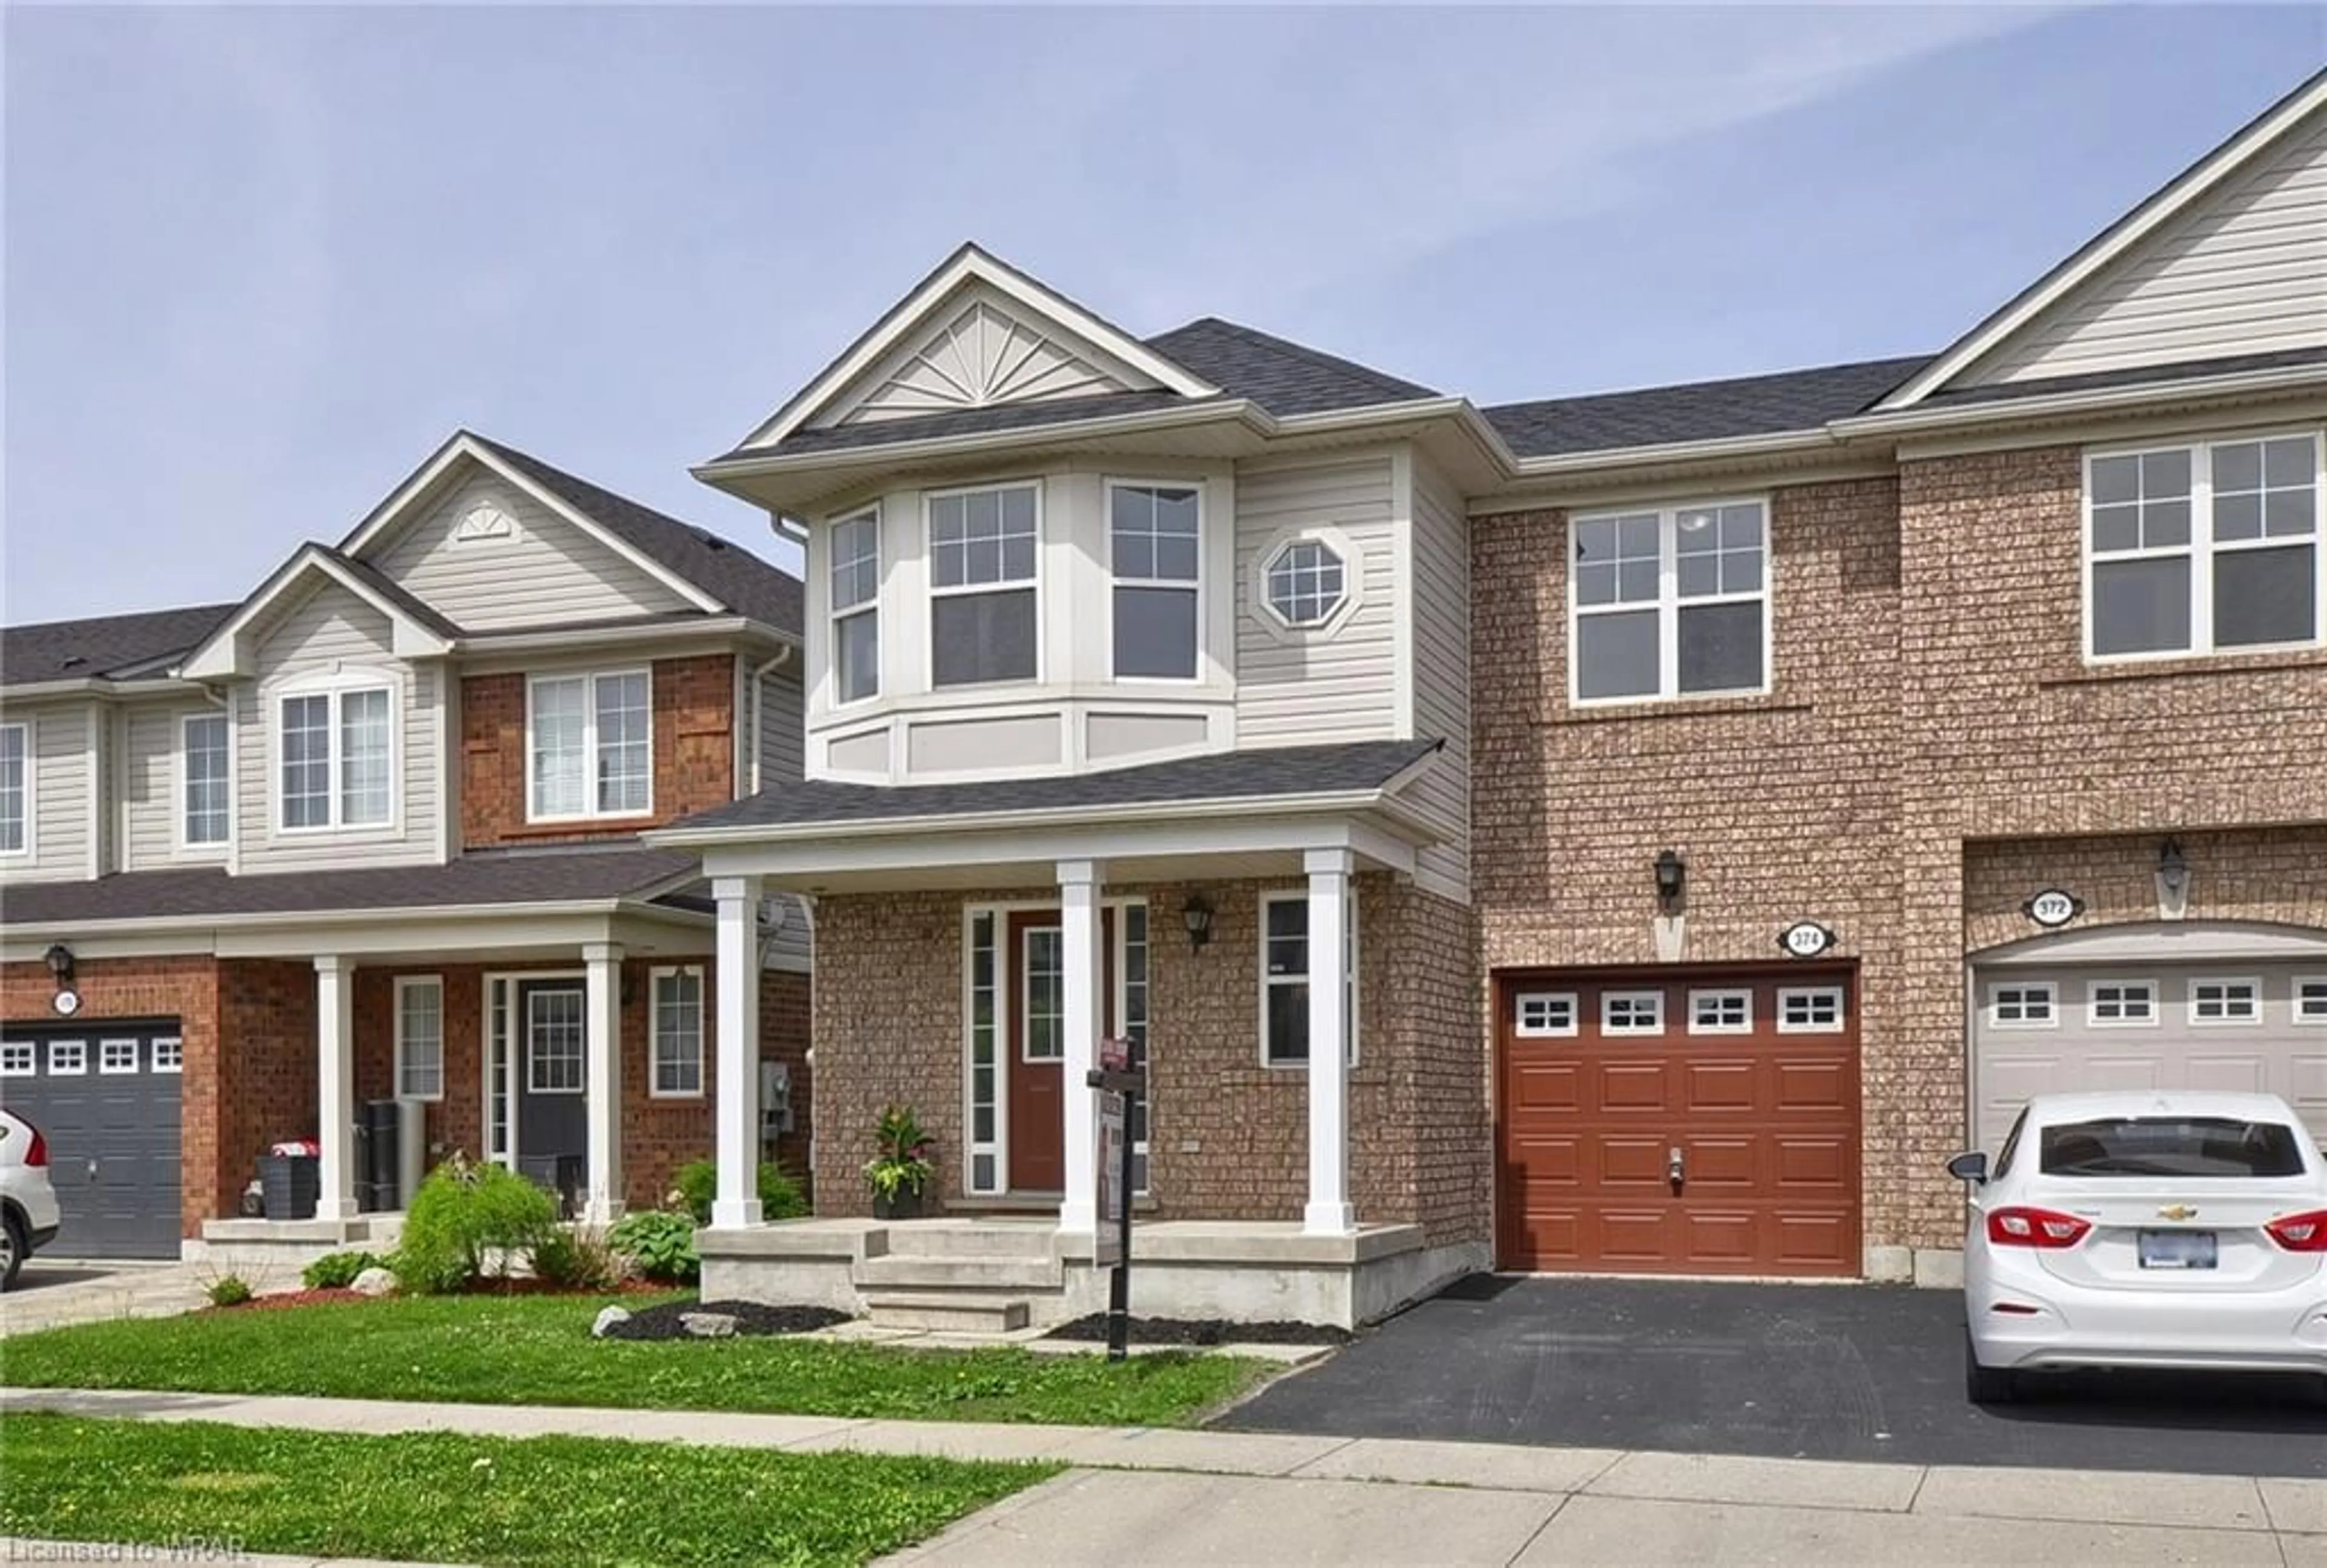 Home with brick exterior material for 374 Garth Massey Dr, Cambridge Ontario N1T 2K5